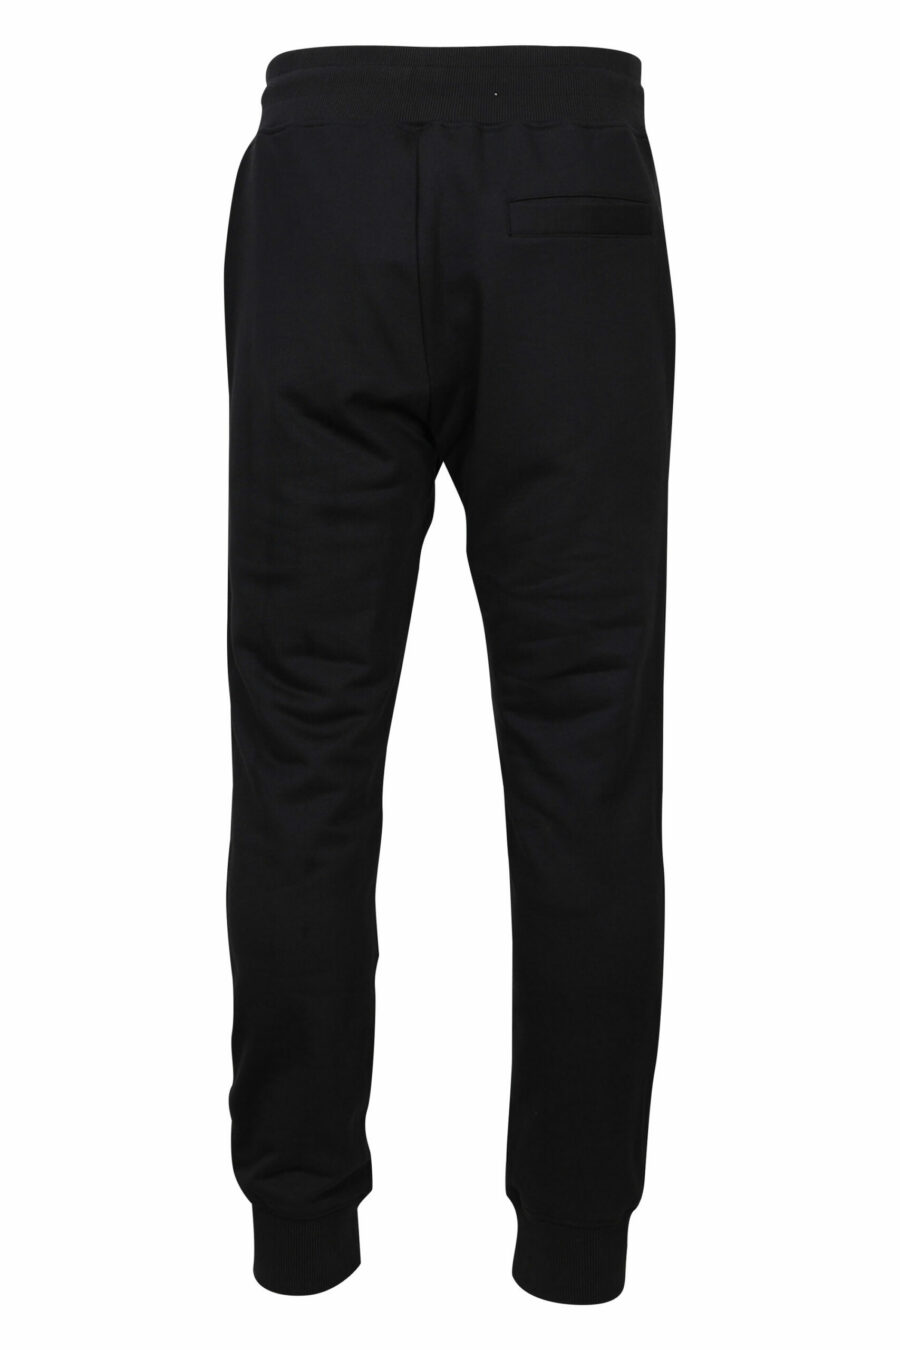 Tracksuit bottoms black with mini logo "piece number" - 8052019467178 2 scaled